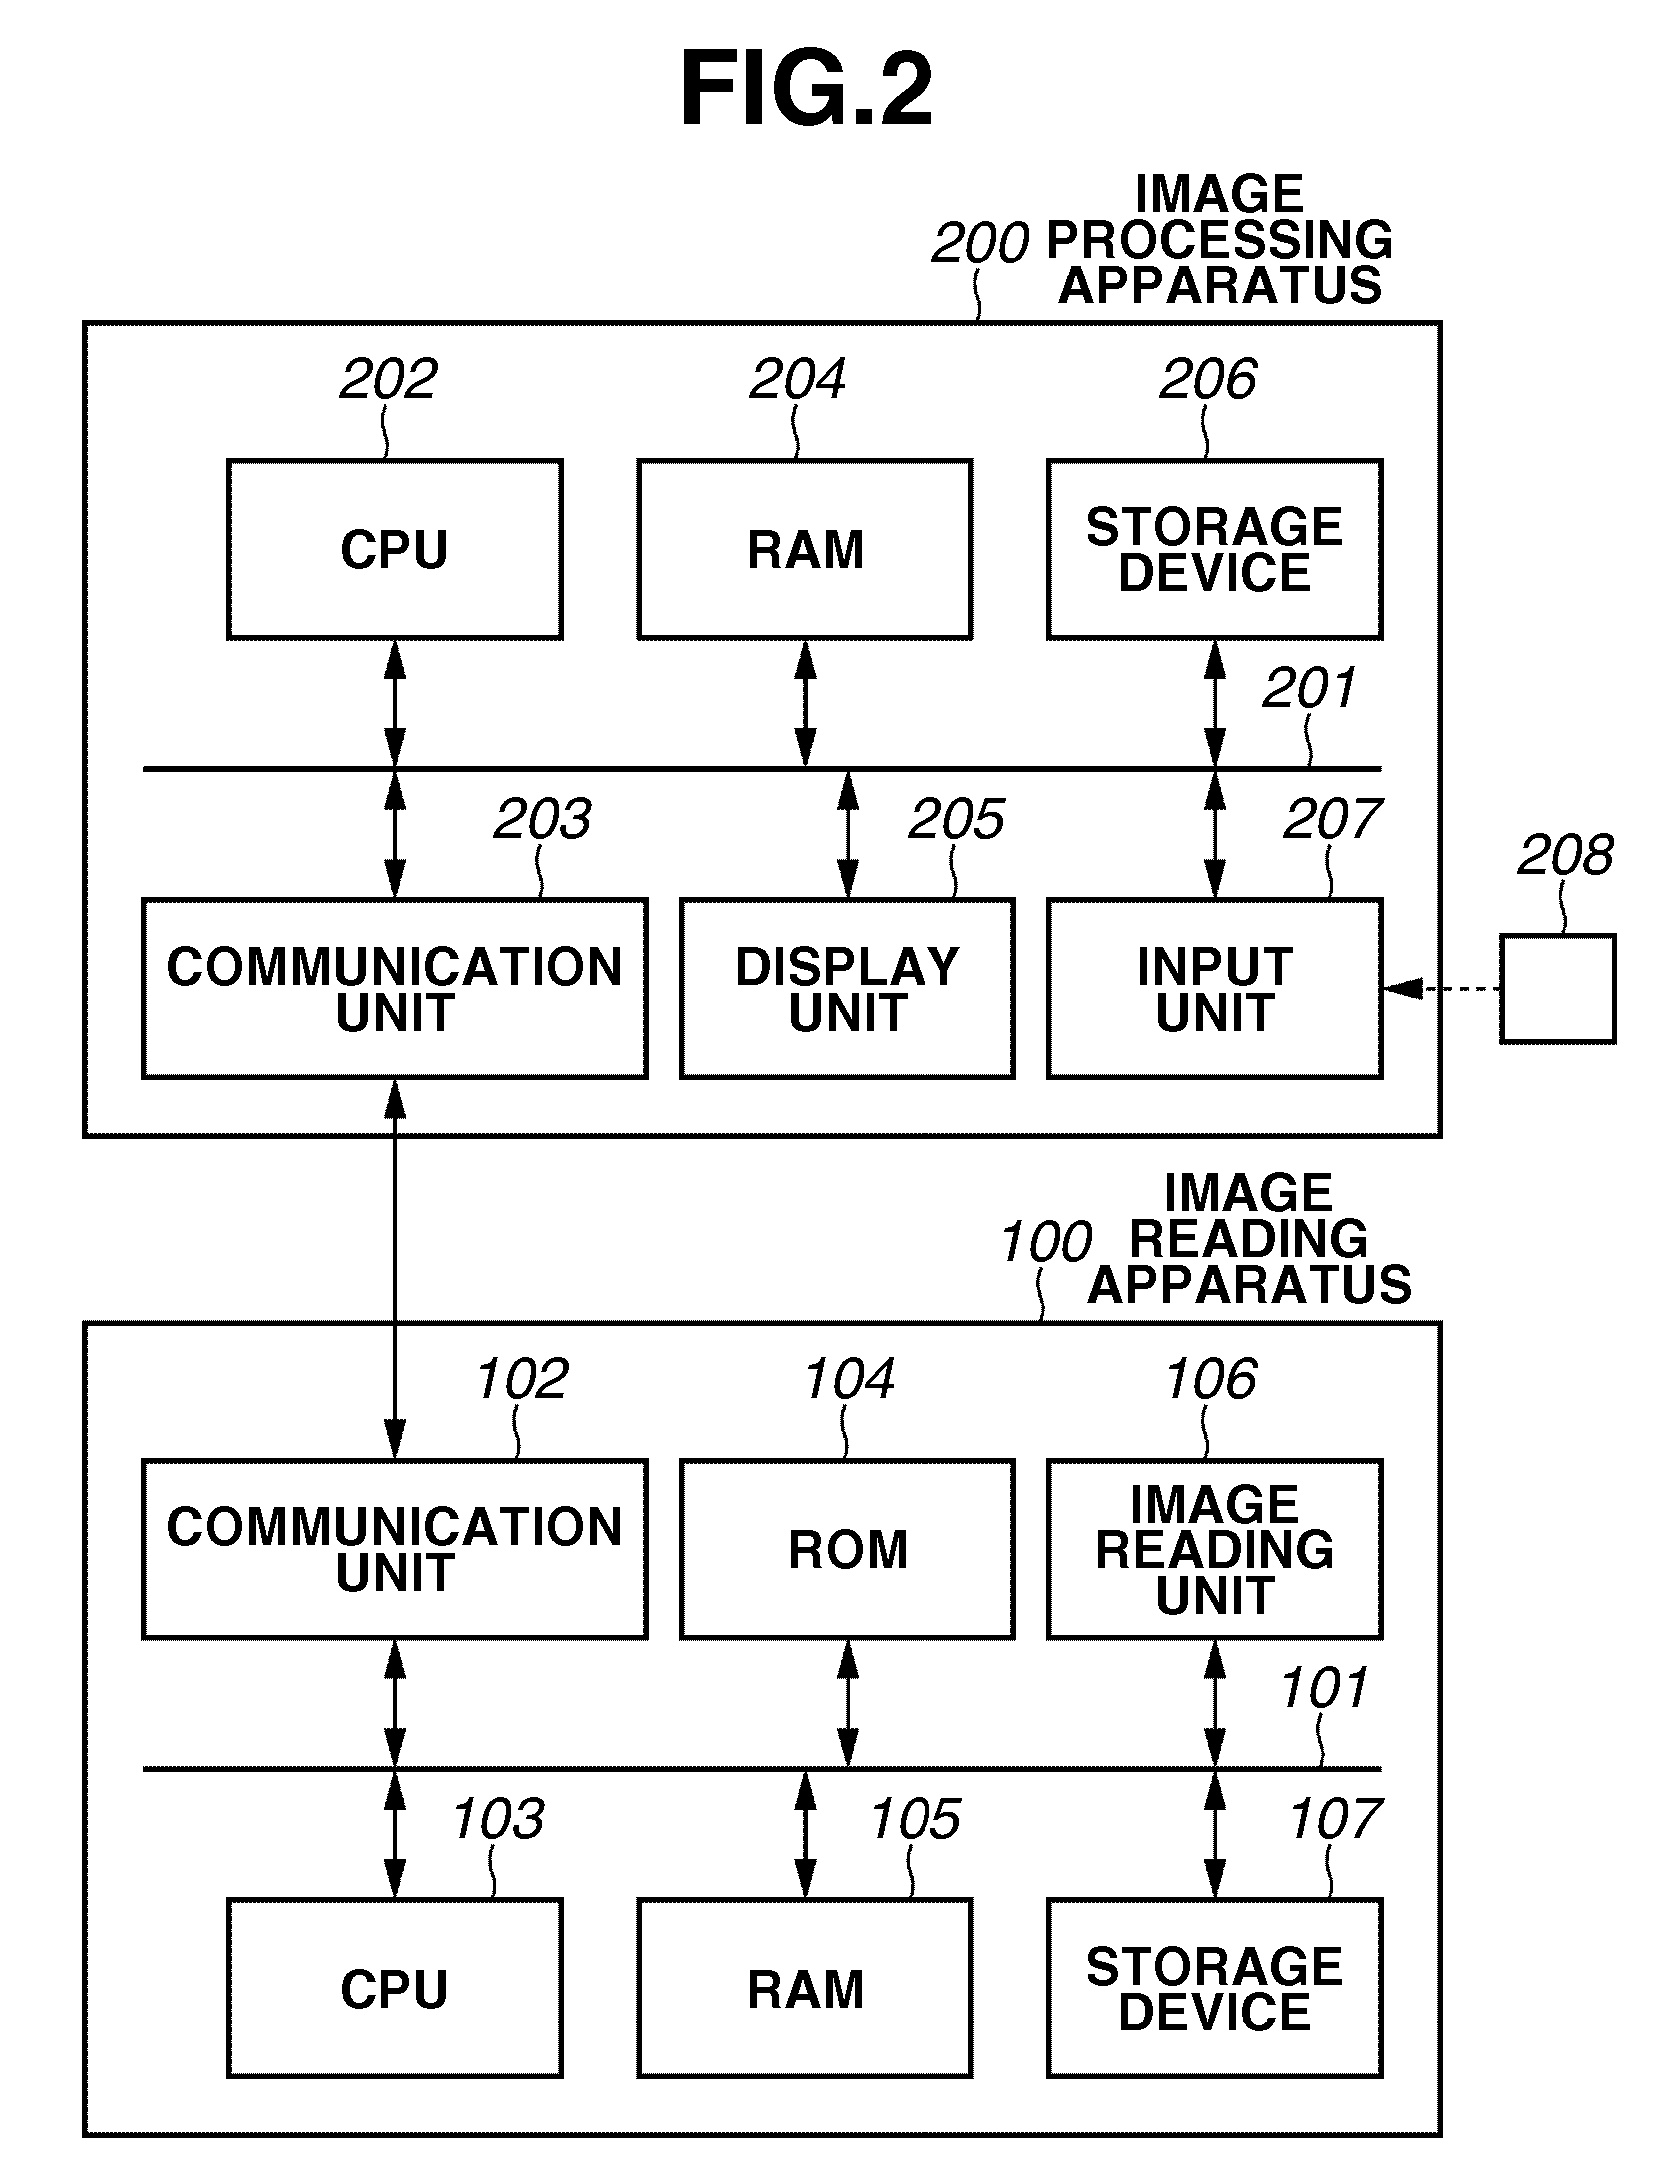 Image reading system, an image reading apparatus and a method for controlling the image reading apparatus